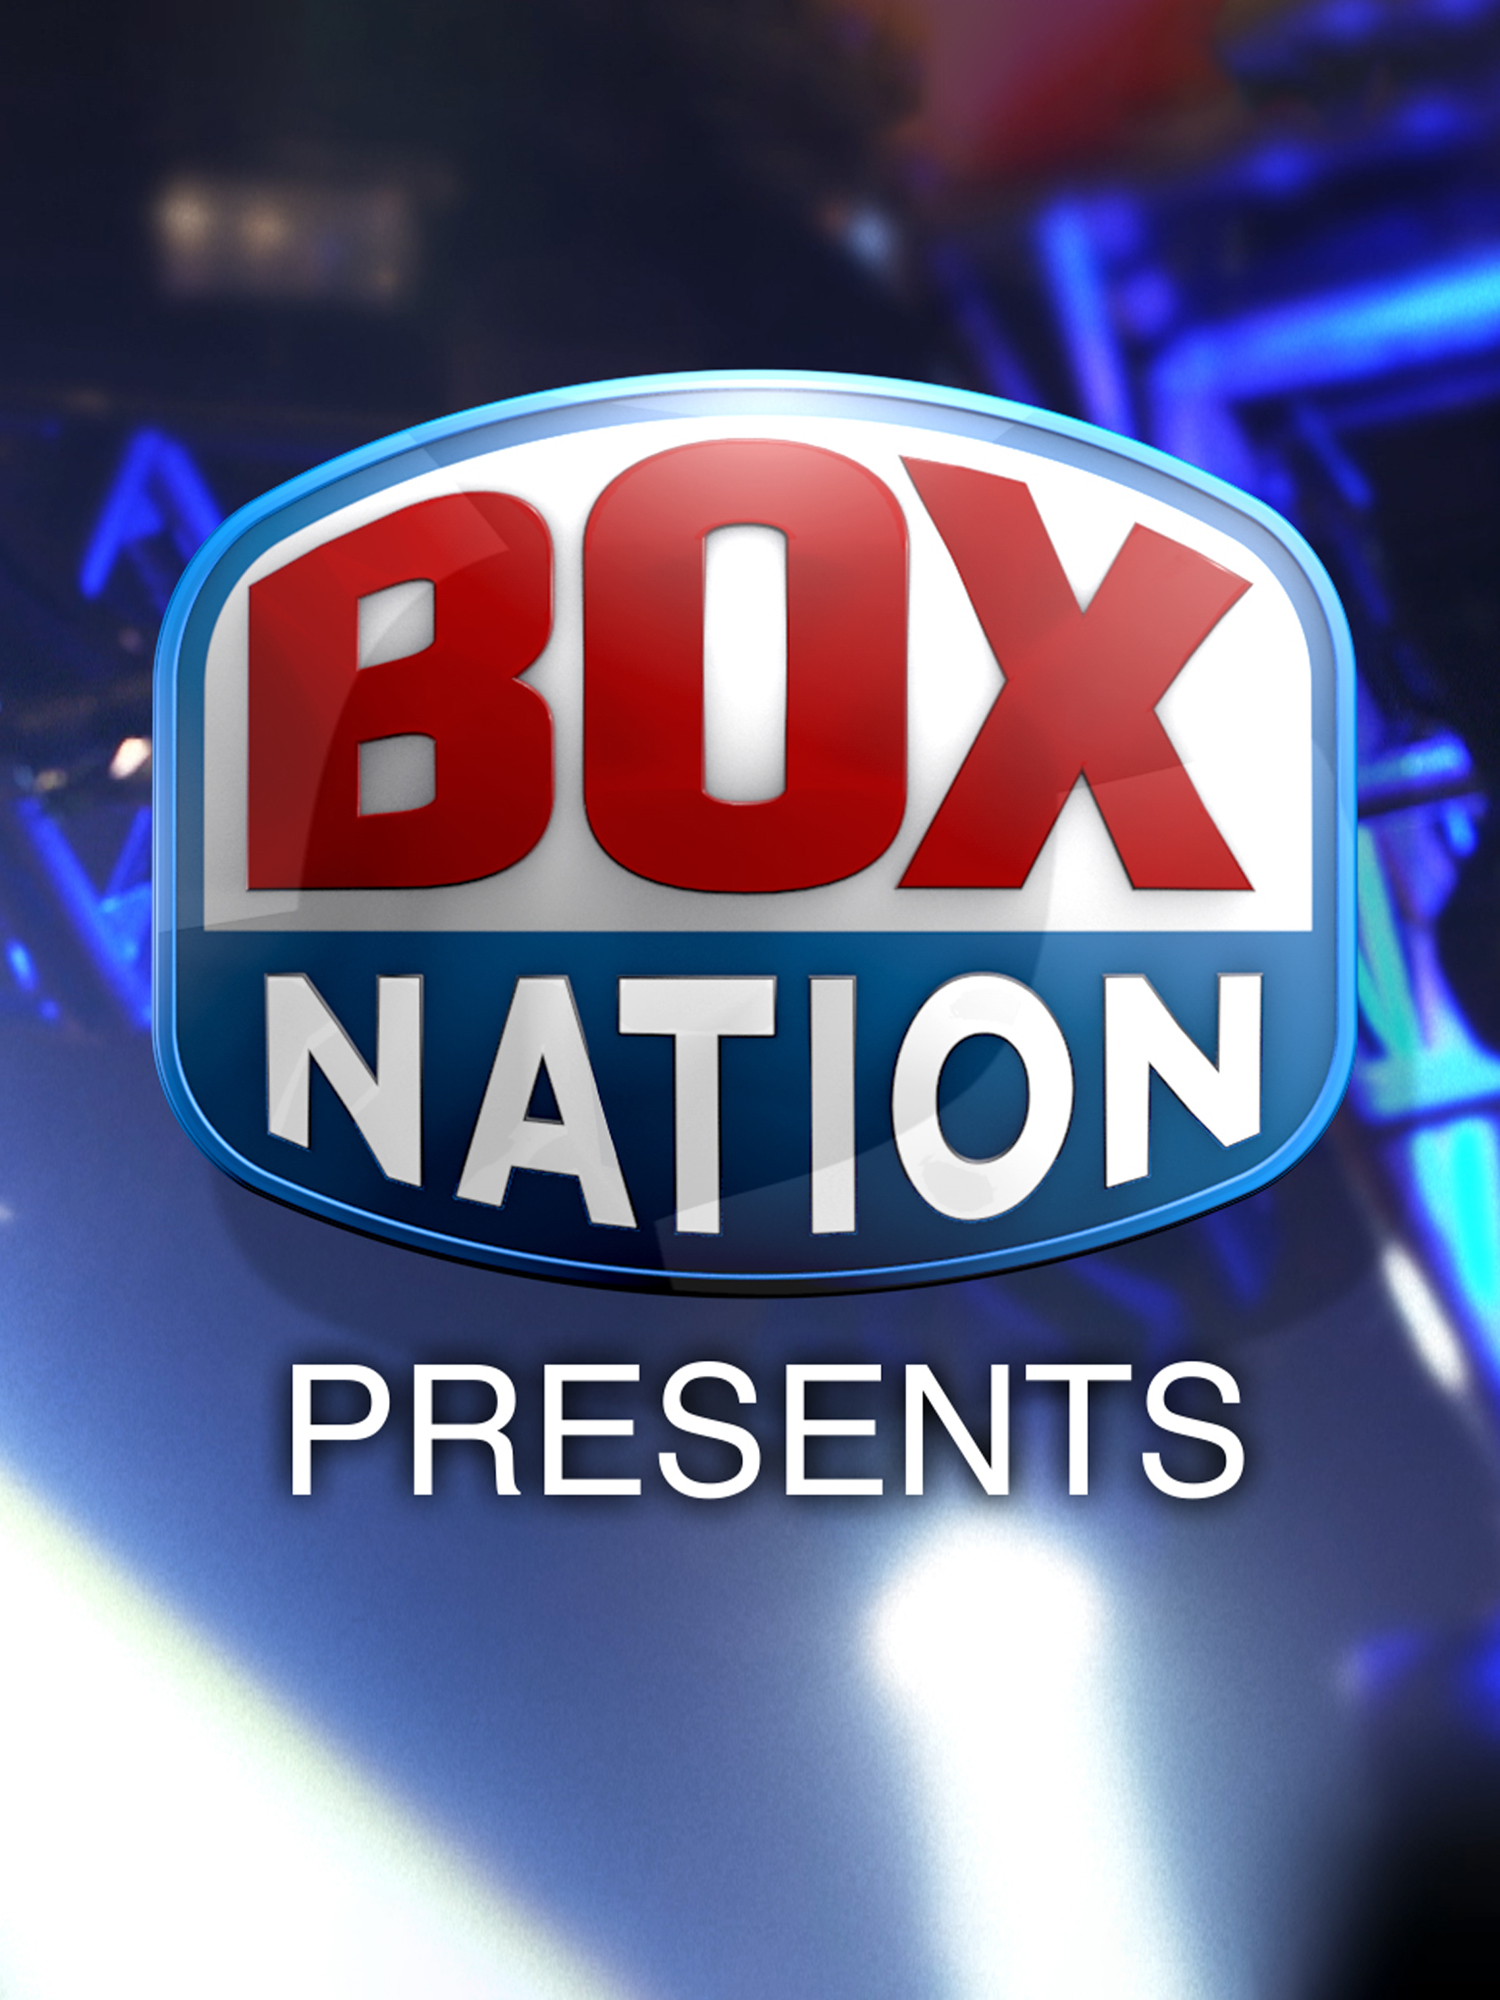 BoxNation Presents - Where to Watch and Stream